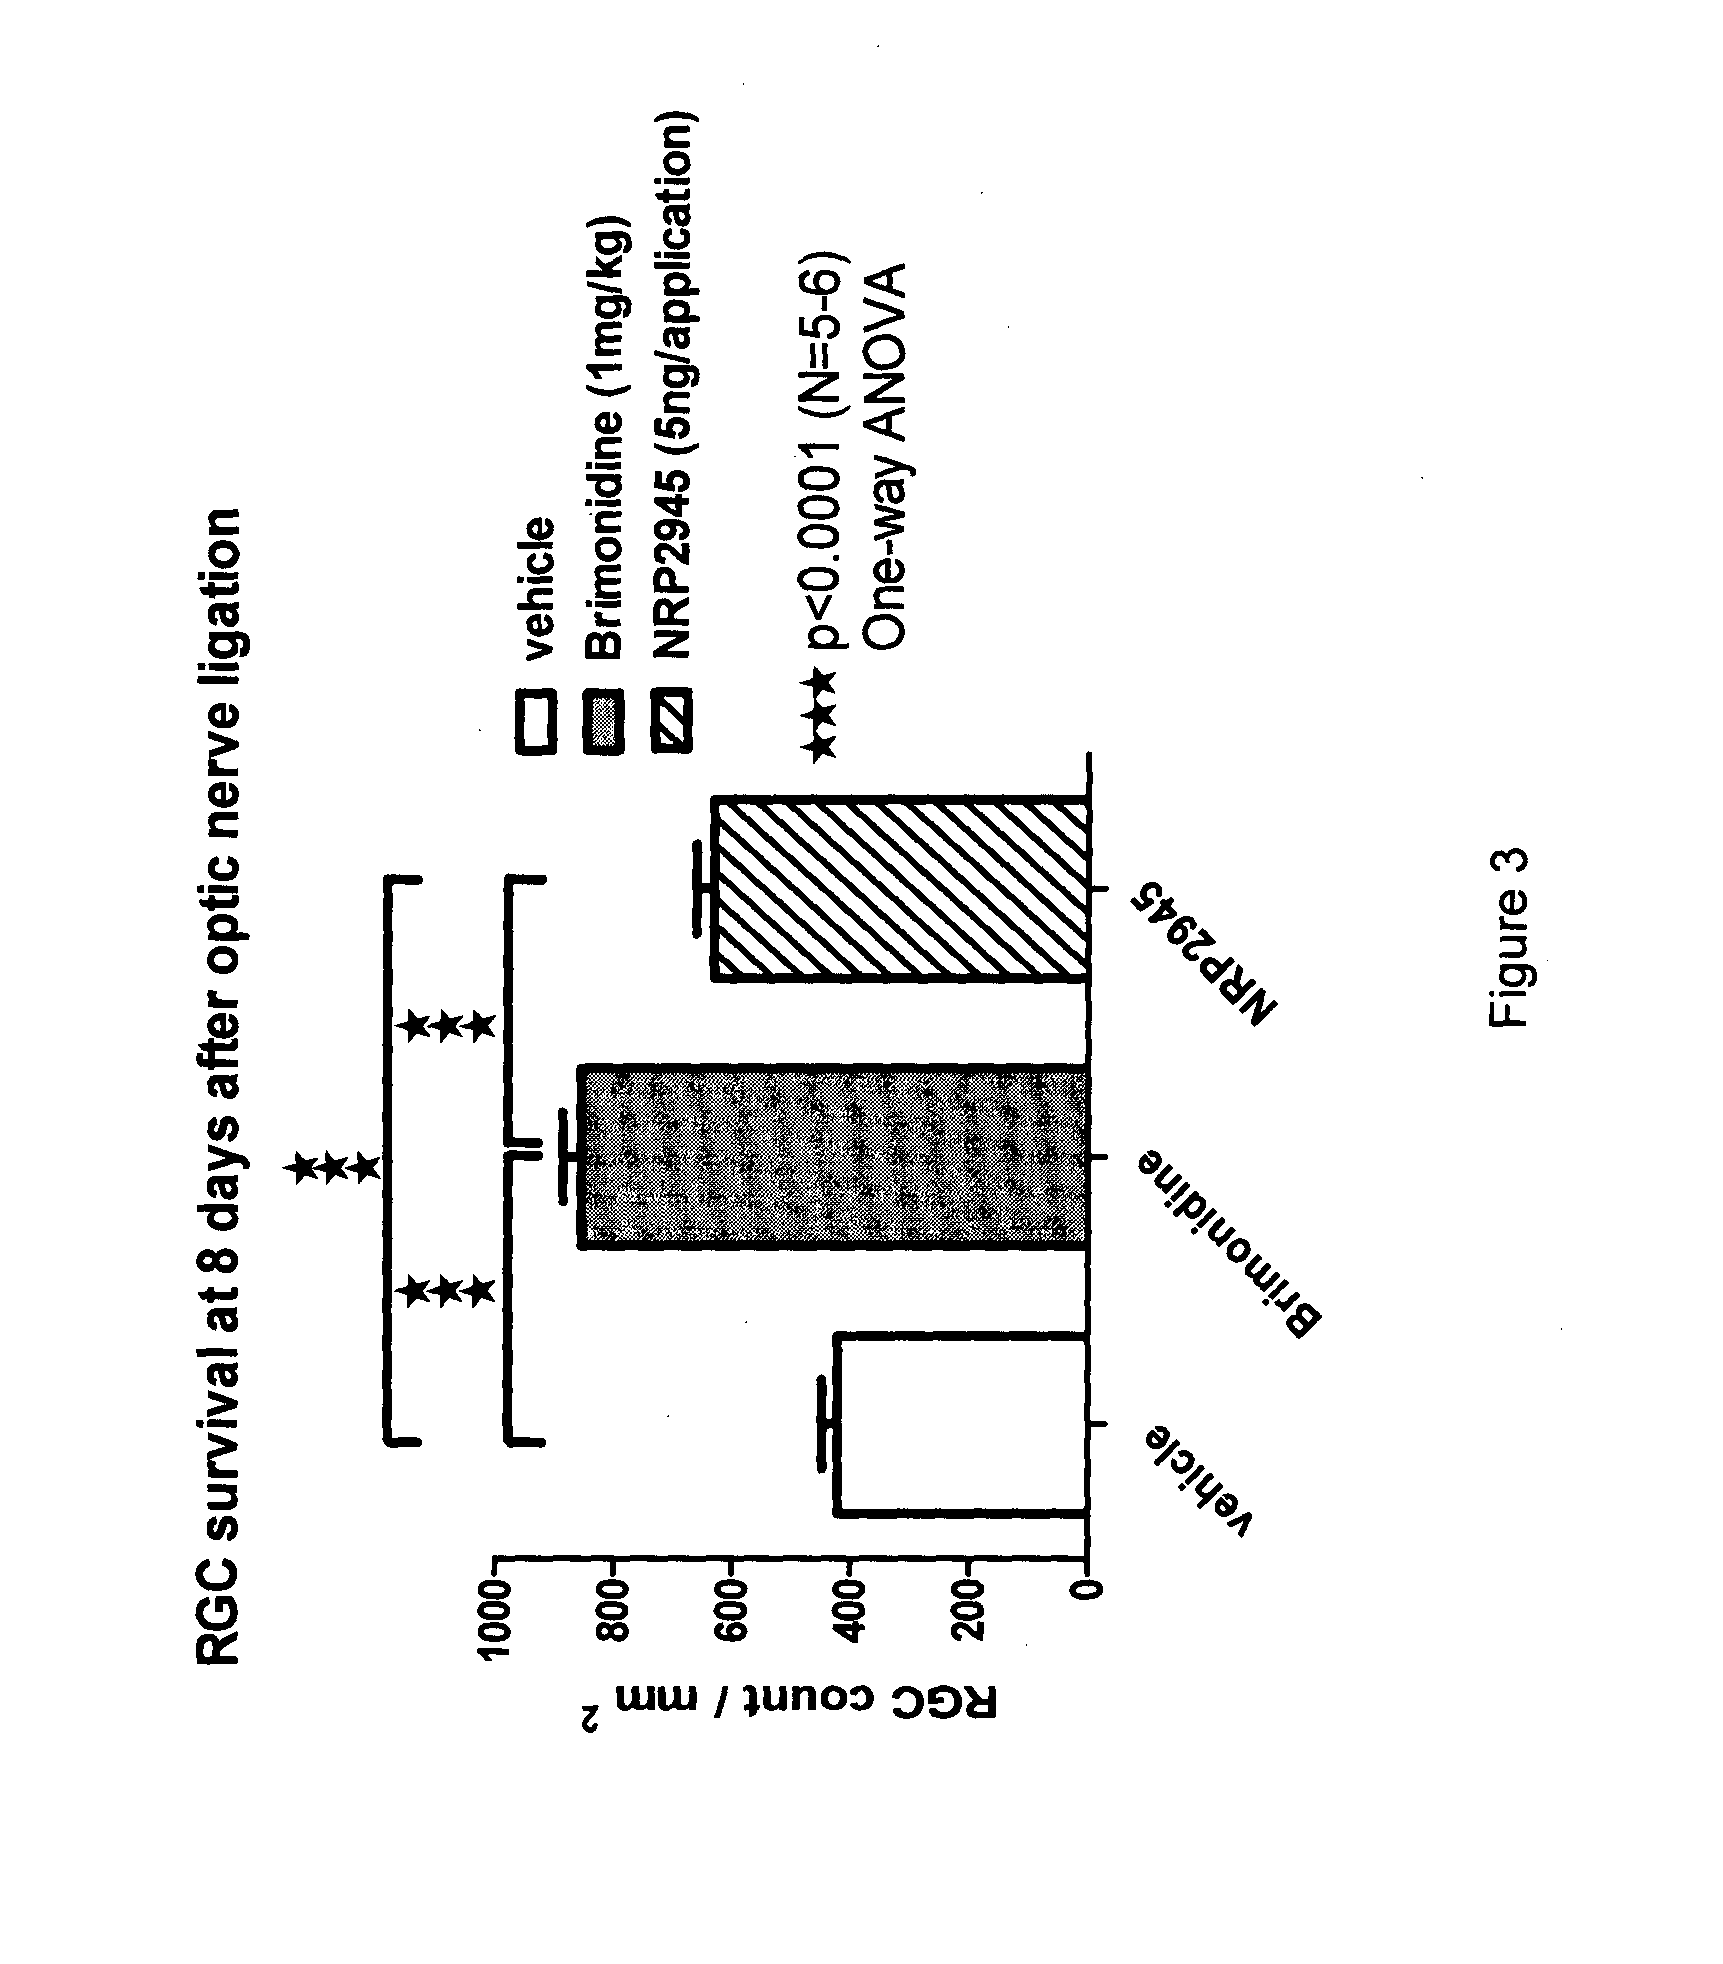 Method of treating optic nerve damage, ophthalmic ischemia or ophthalmic reperfusion injury